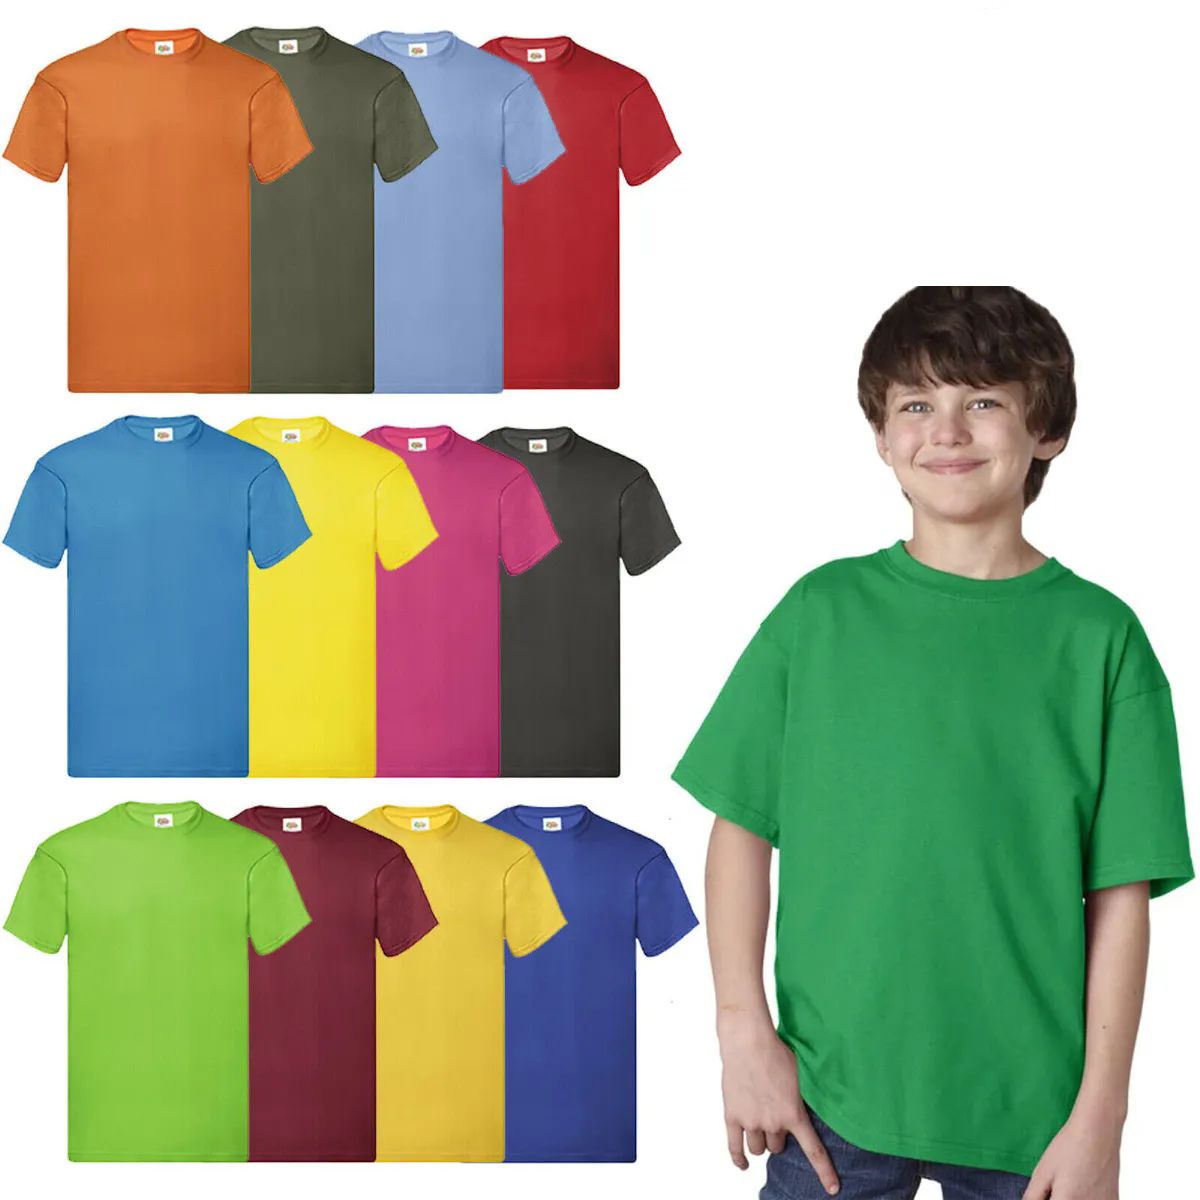 144 Pieces of Billion Hats Kids Youth Cotton Assorted Colors T Shirts Size M